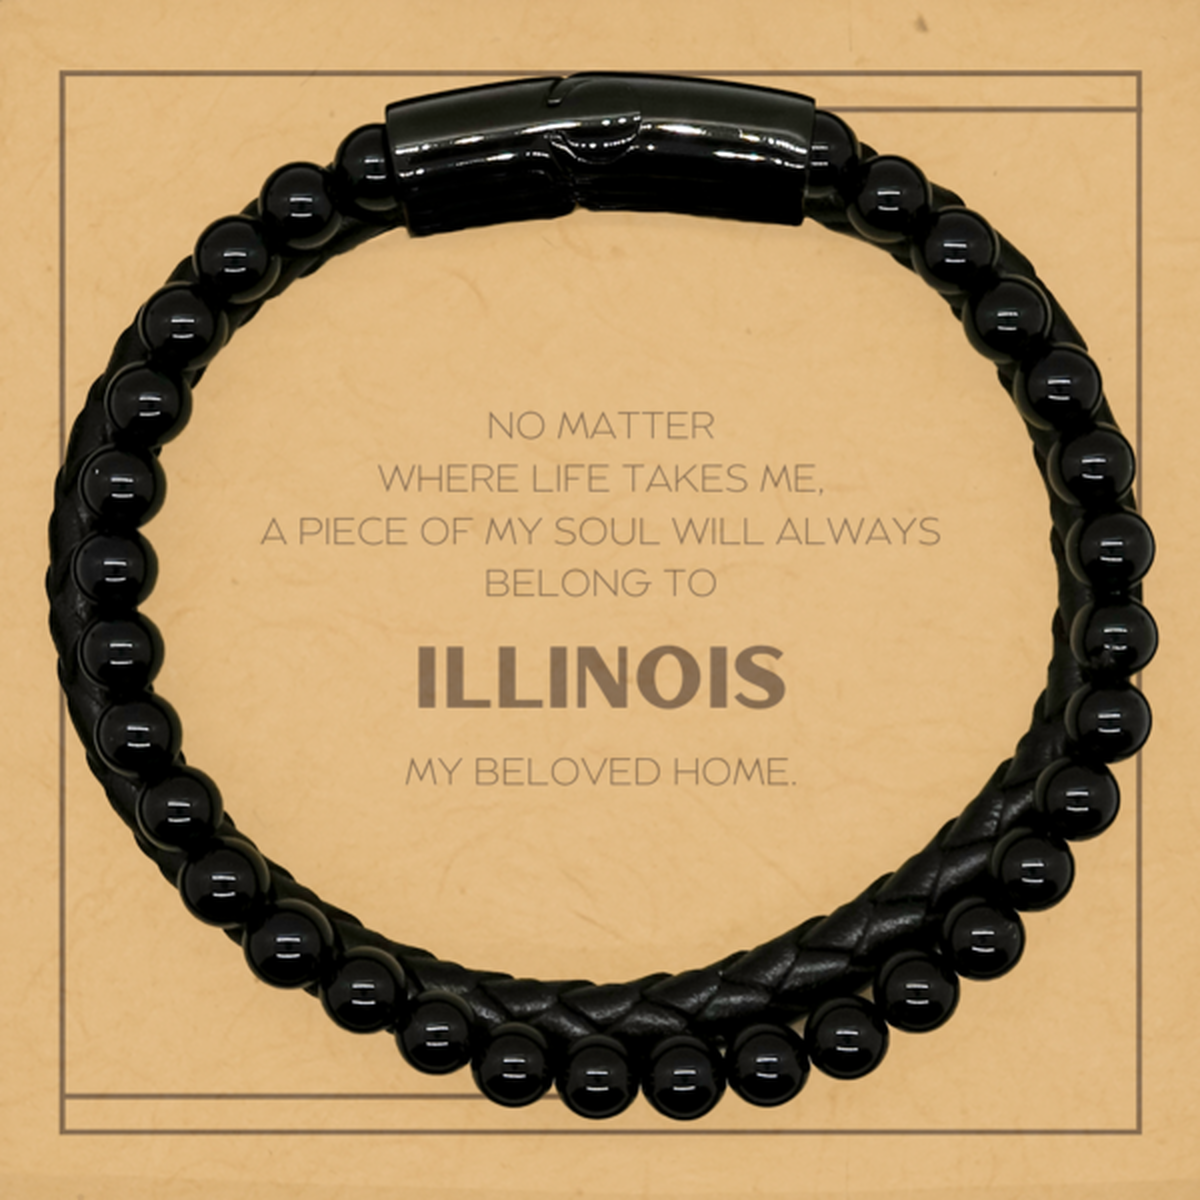 Love Illinois State Gifts, My soul will always belong to Illinois, Proud Stone Leather Bracelets, Birthday Unique Gifts For Illinois Men, Women, Friends